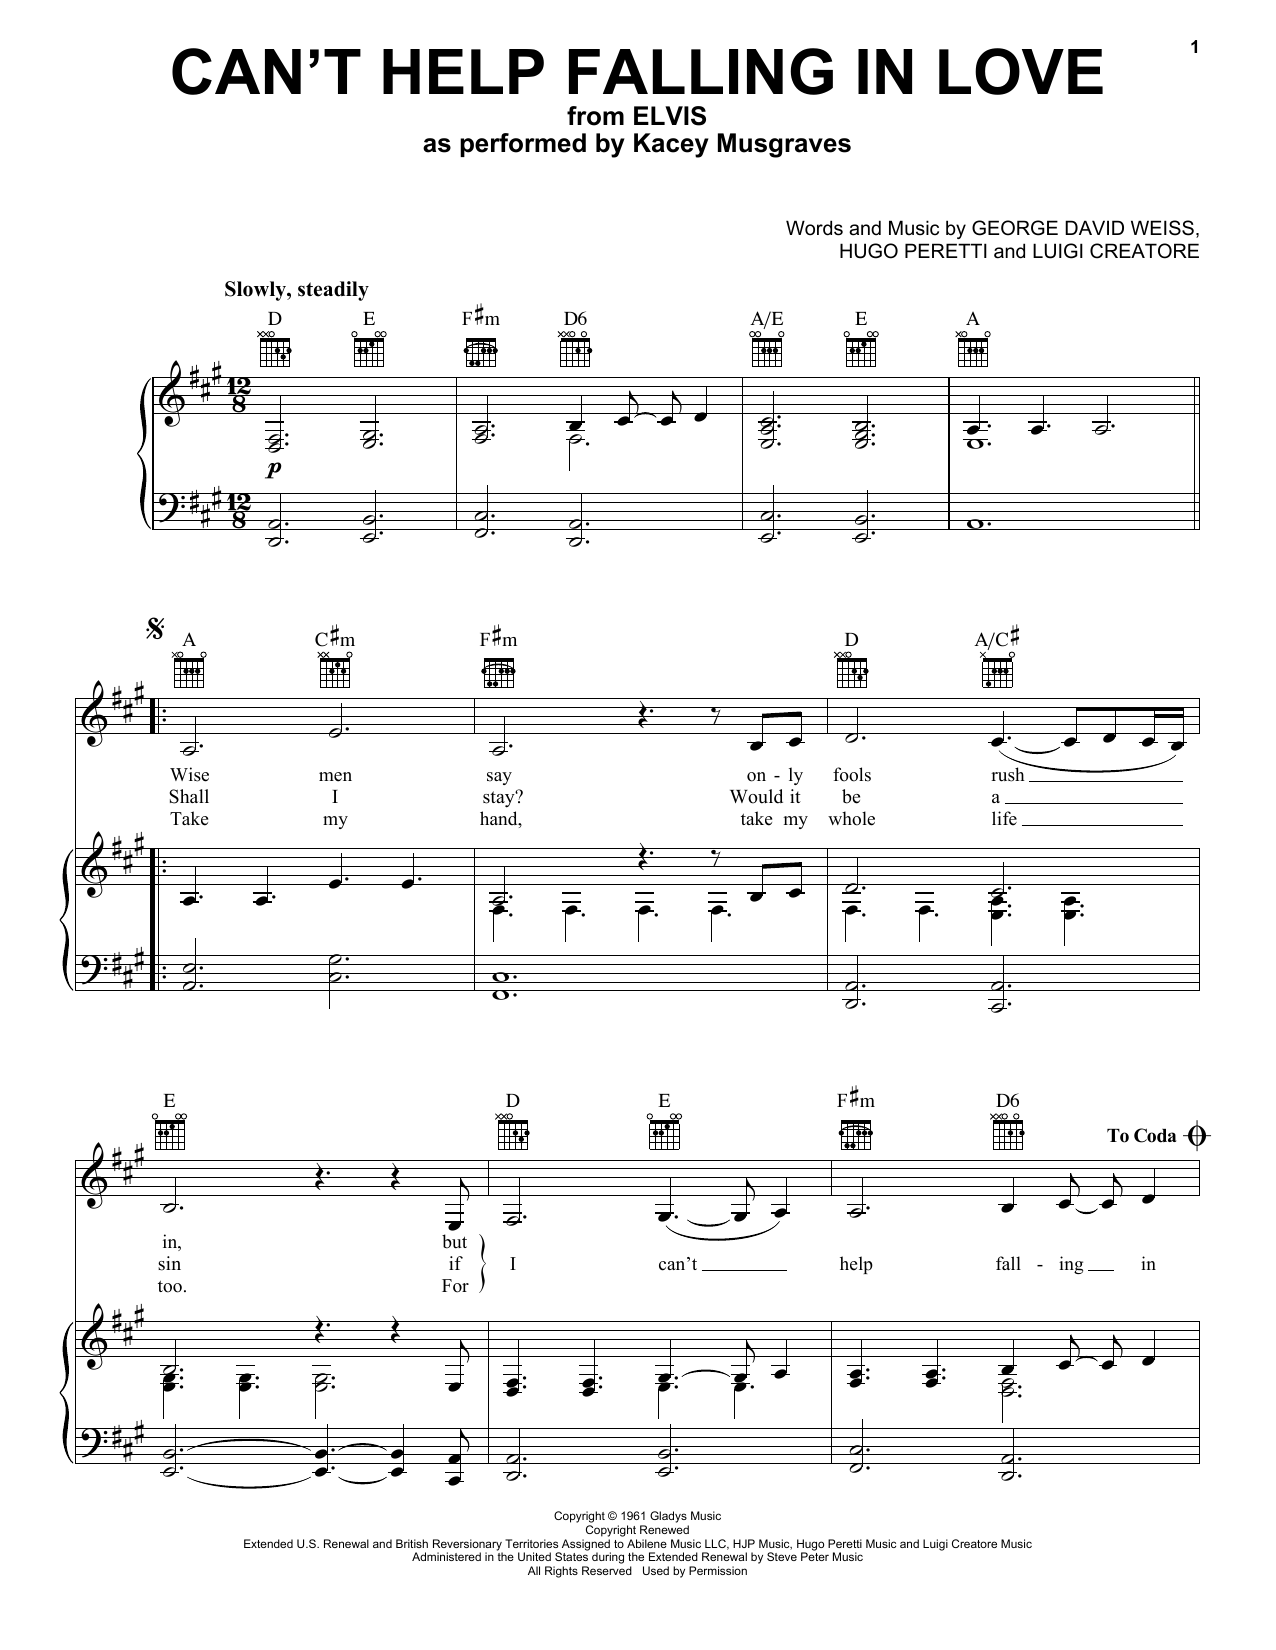 Download Kacey Musgraves / from ELVIS Can't Help Falling In Love Sheet Music